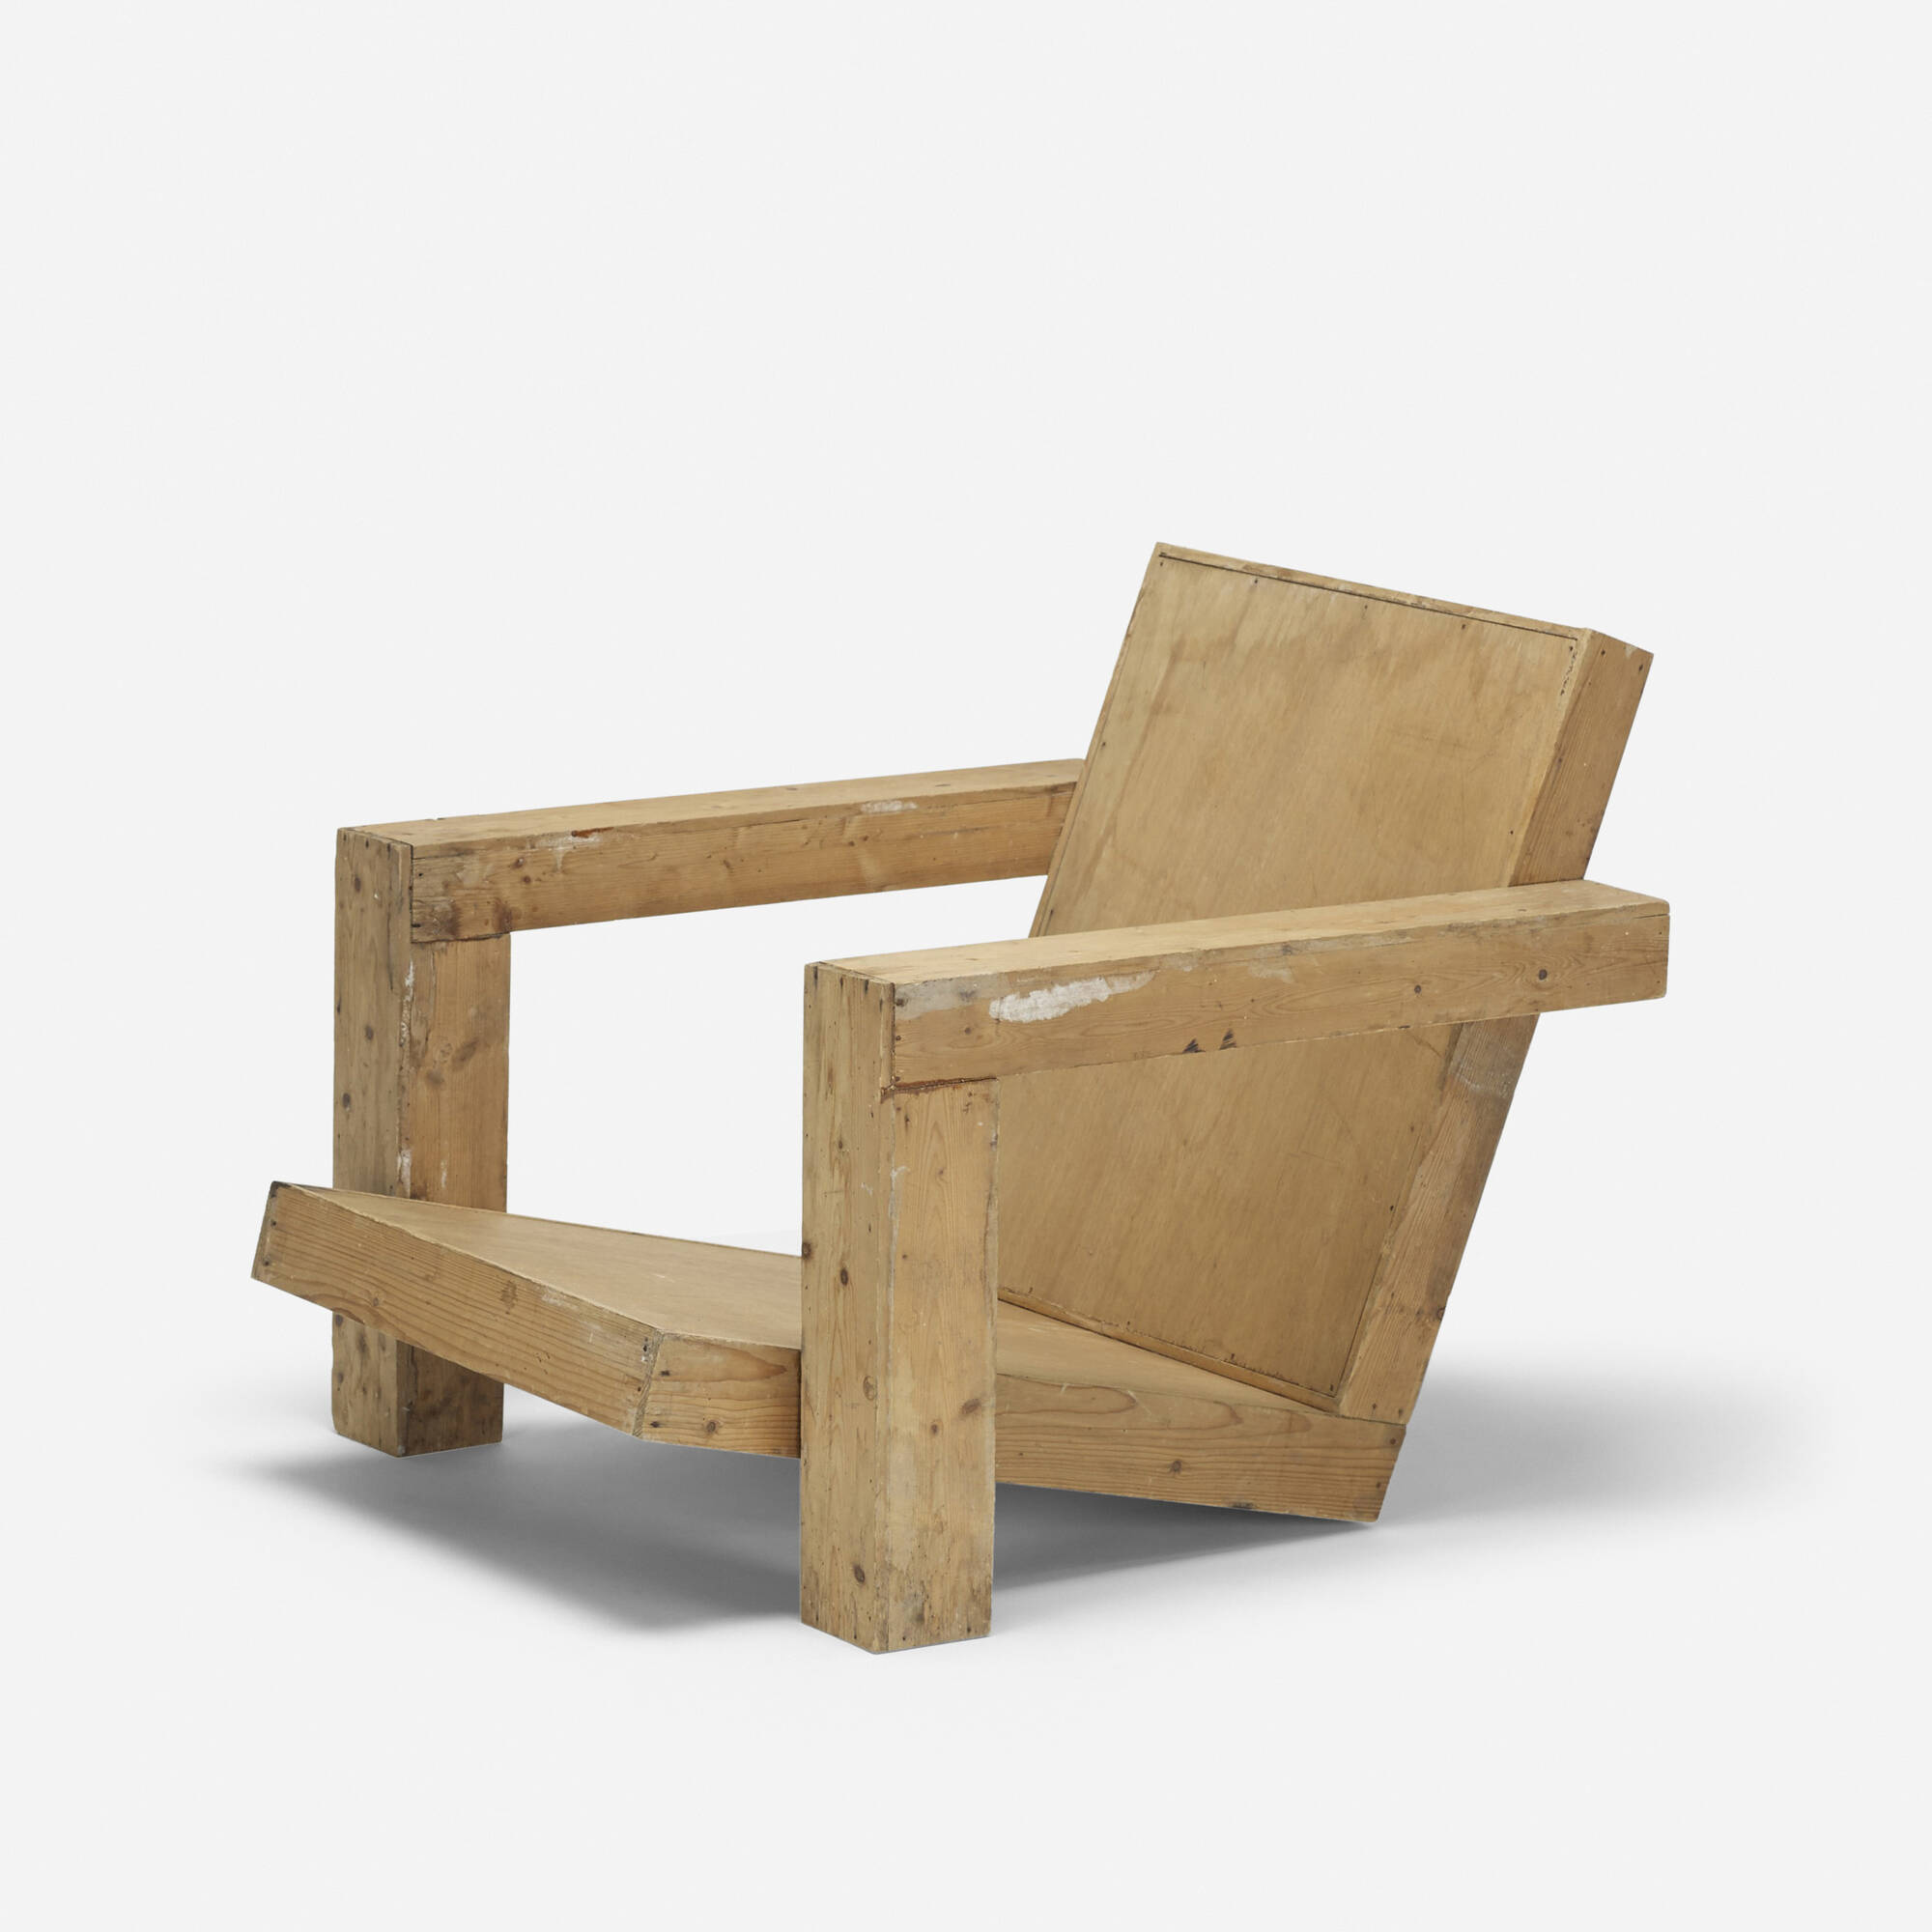 Wooden Rolling Chair